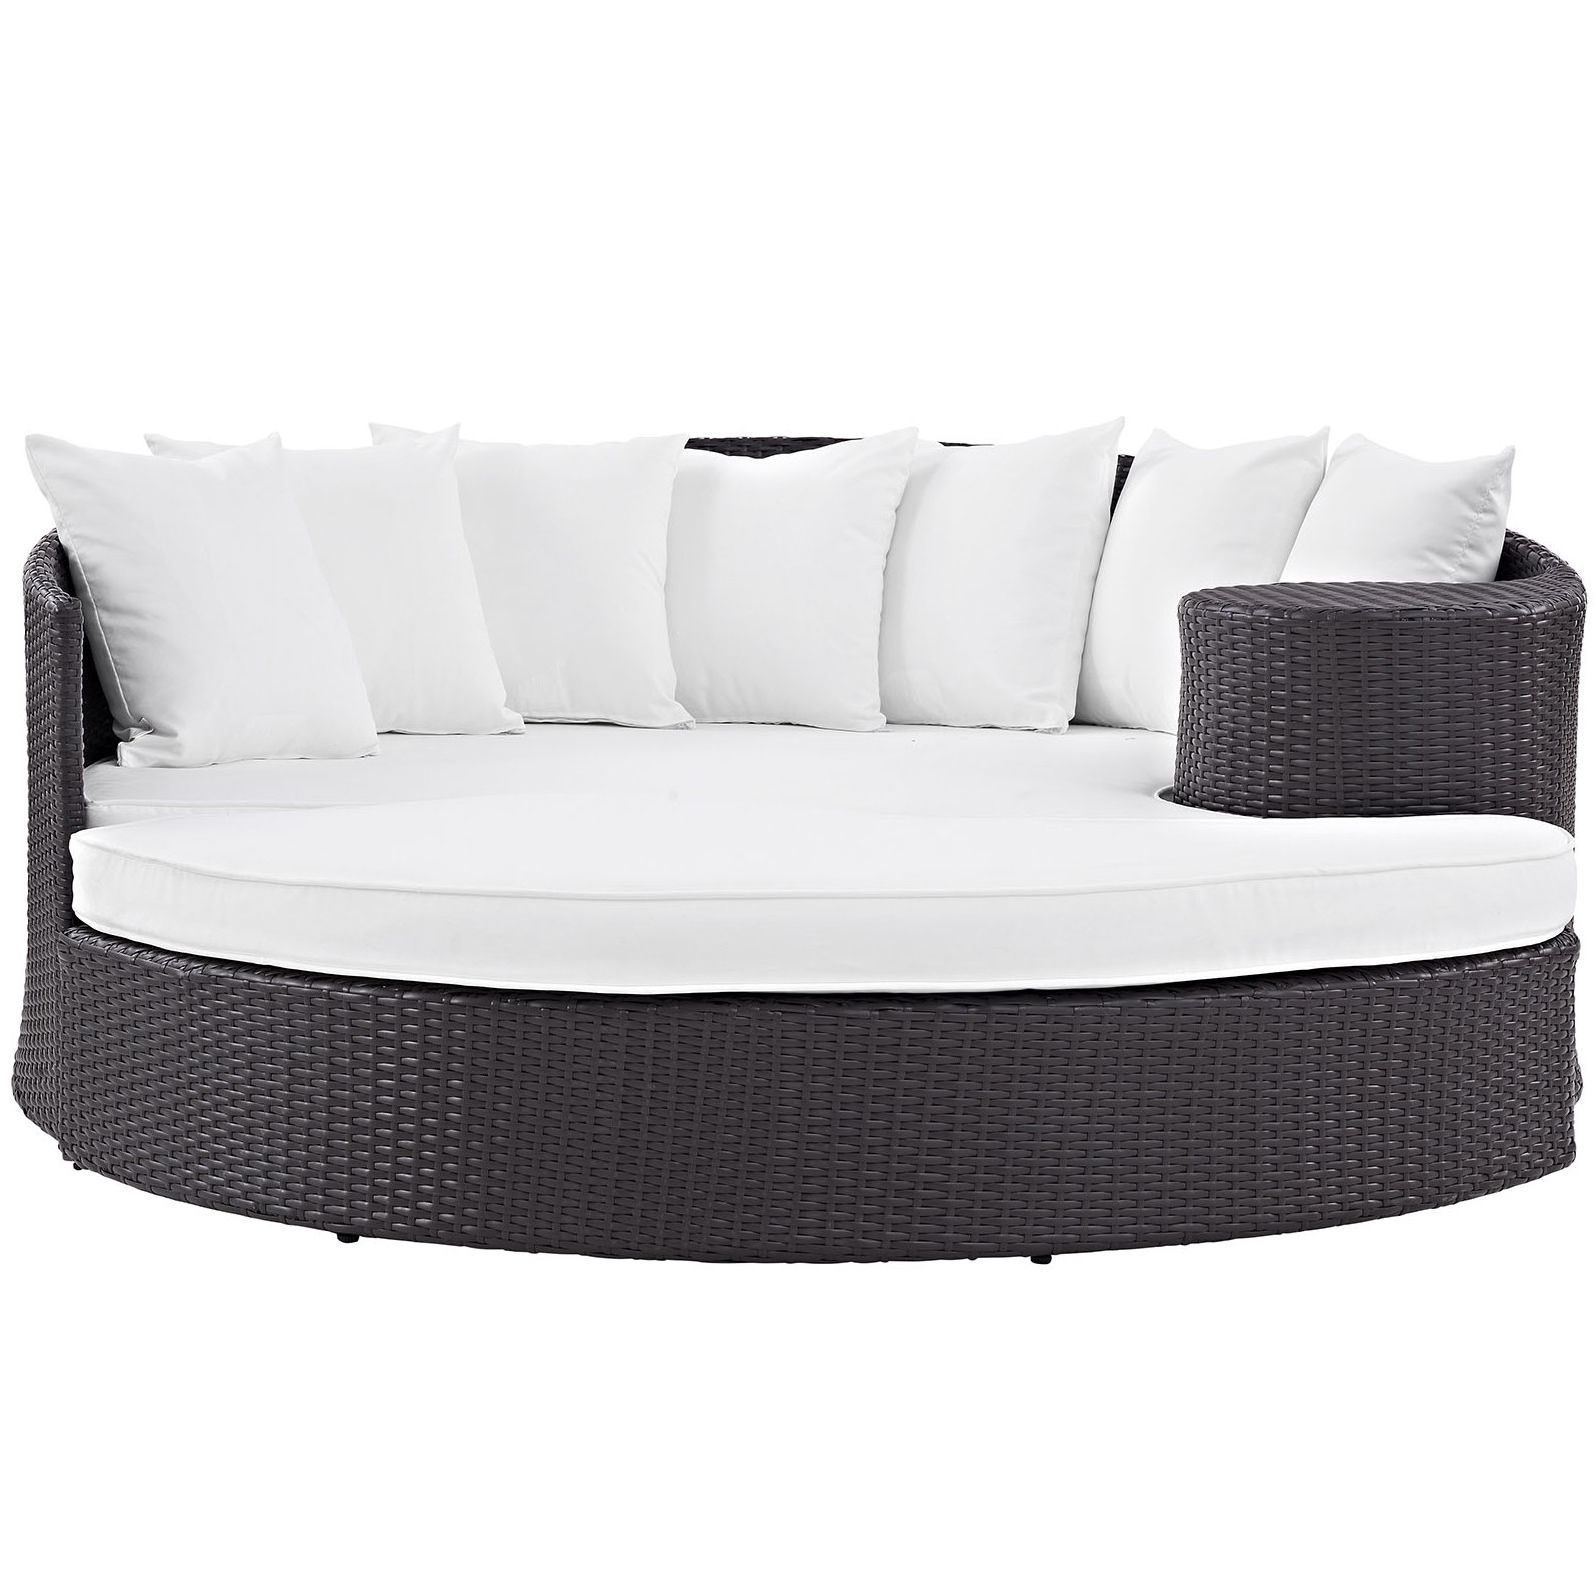 Brentwood Patio Daybed With Cushions Intended For Widely Used Tripp Patio Daybeds With Cushions (Photo 11 of 20)